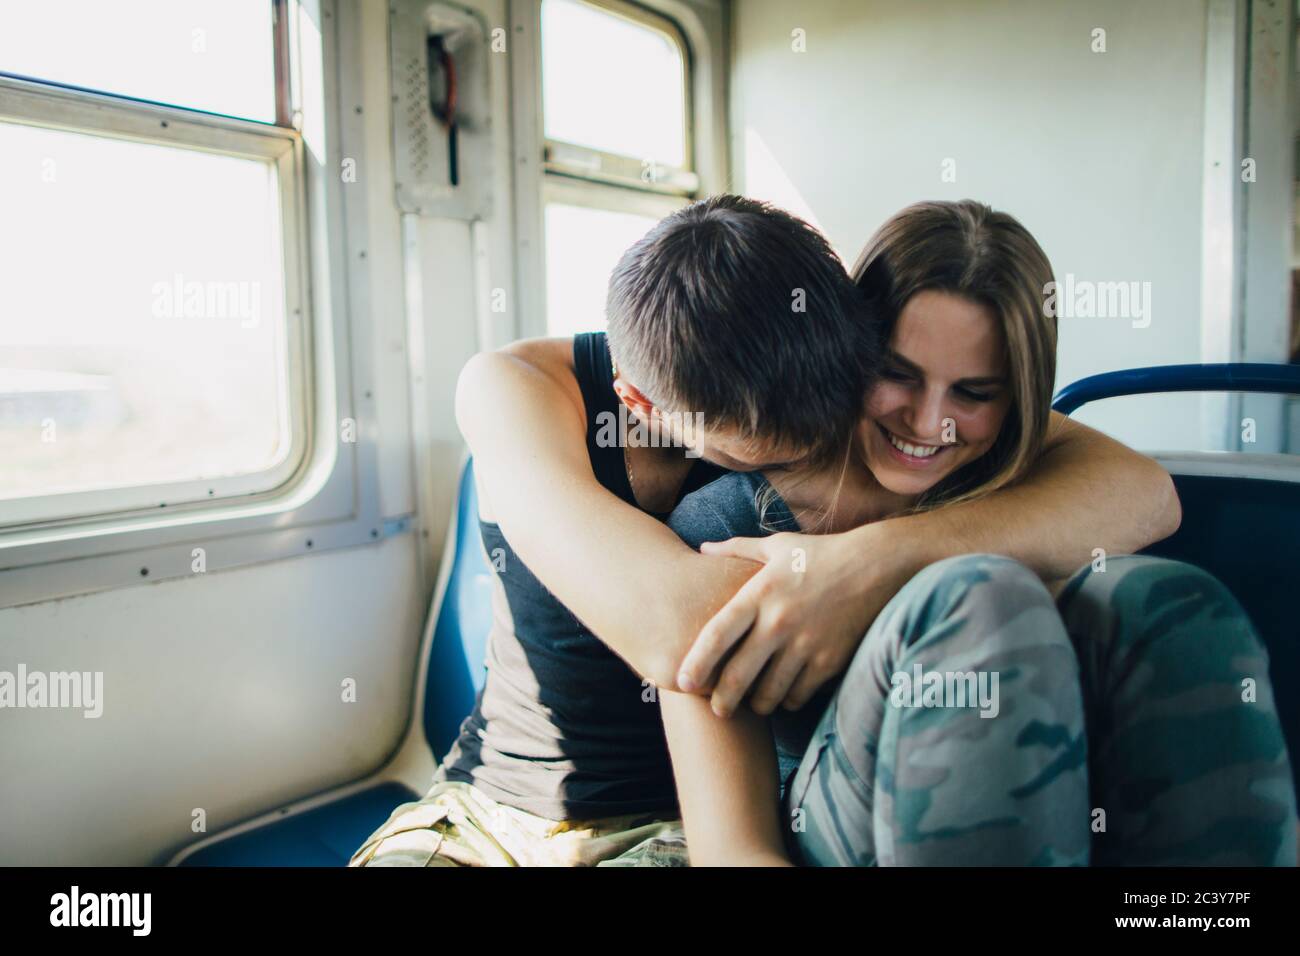 Young couple embracing in train Stock Photo